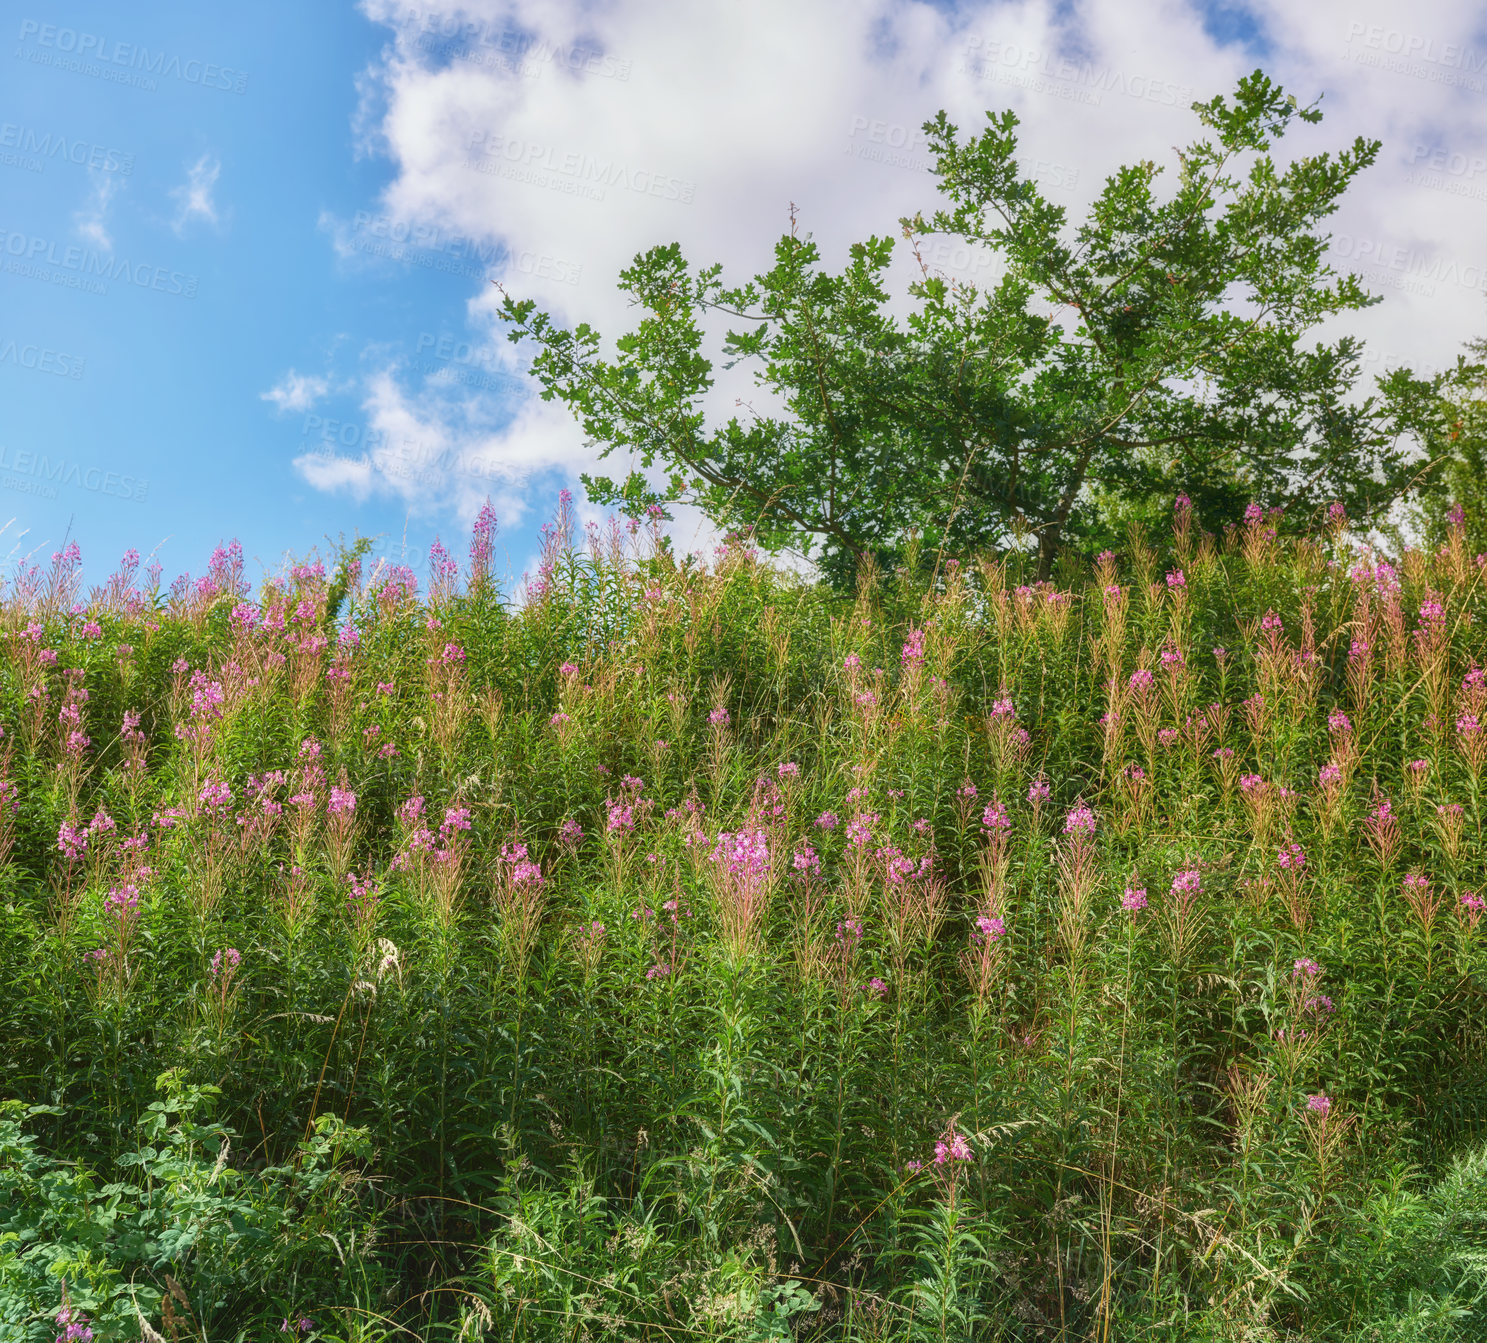 Buy stock photo Pink fireweed flowers growing on green stems in lush meadow bush and shrub in remote countryside with blue sky and clouds. Wild hamaenerion angustifolium or rosebay willowherb blossoming near forest